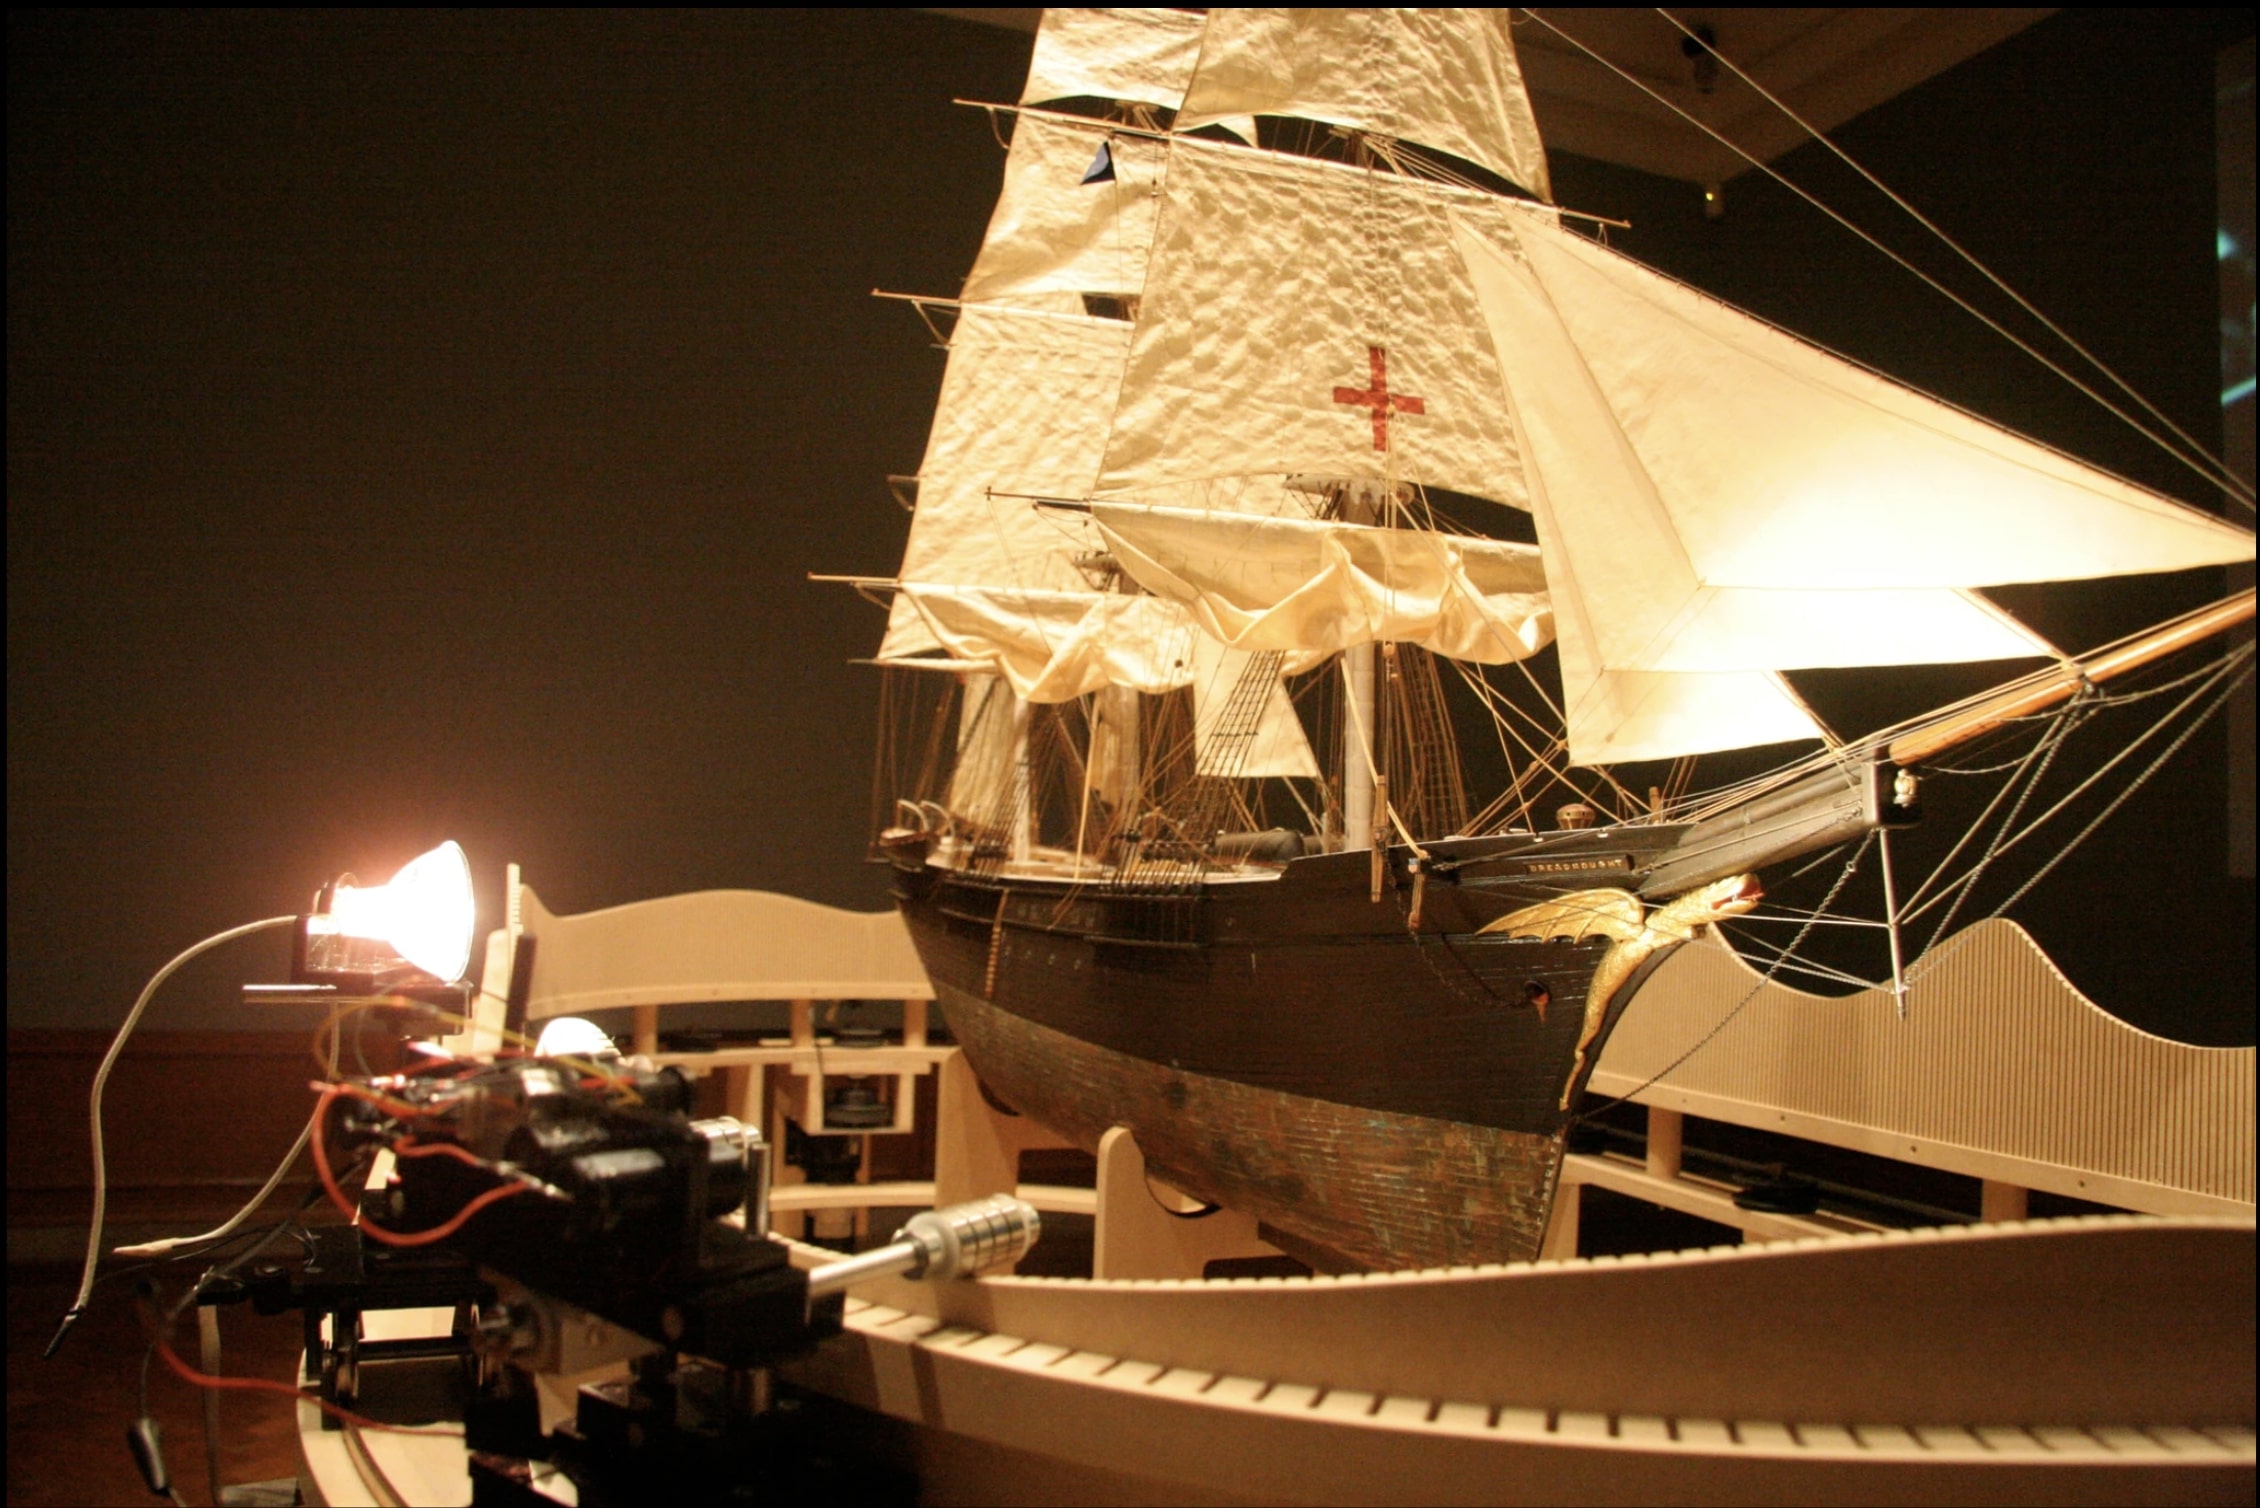 A photo of a sculptural installation featuring a model of a boat